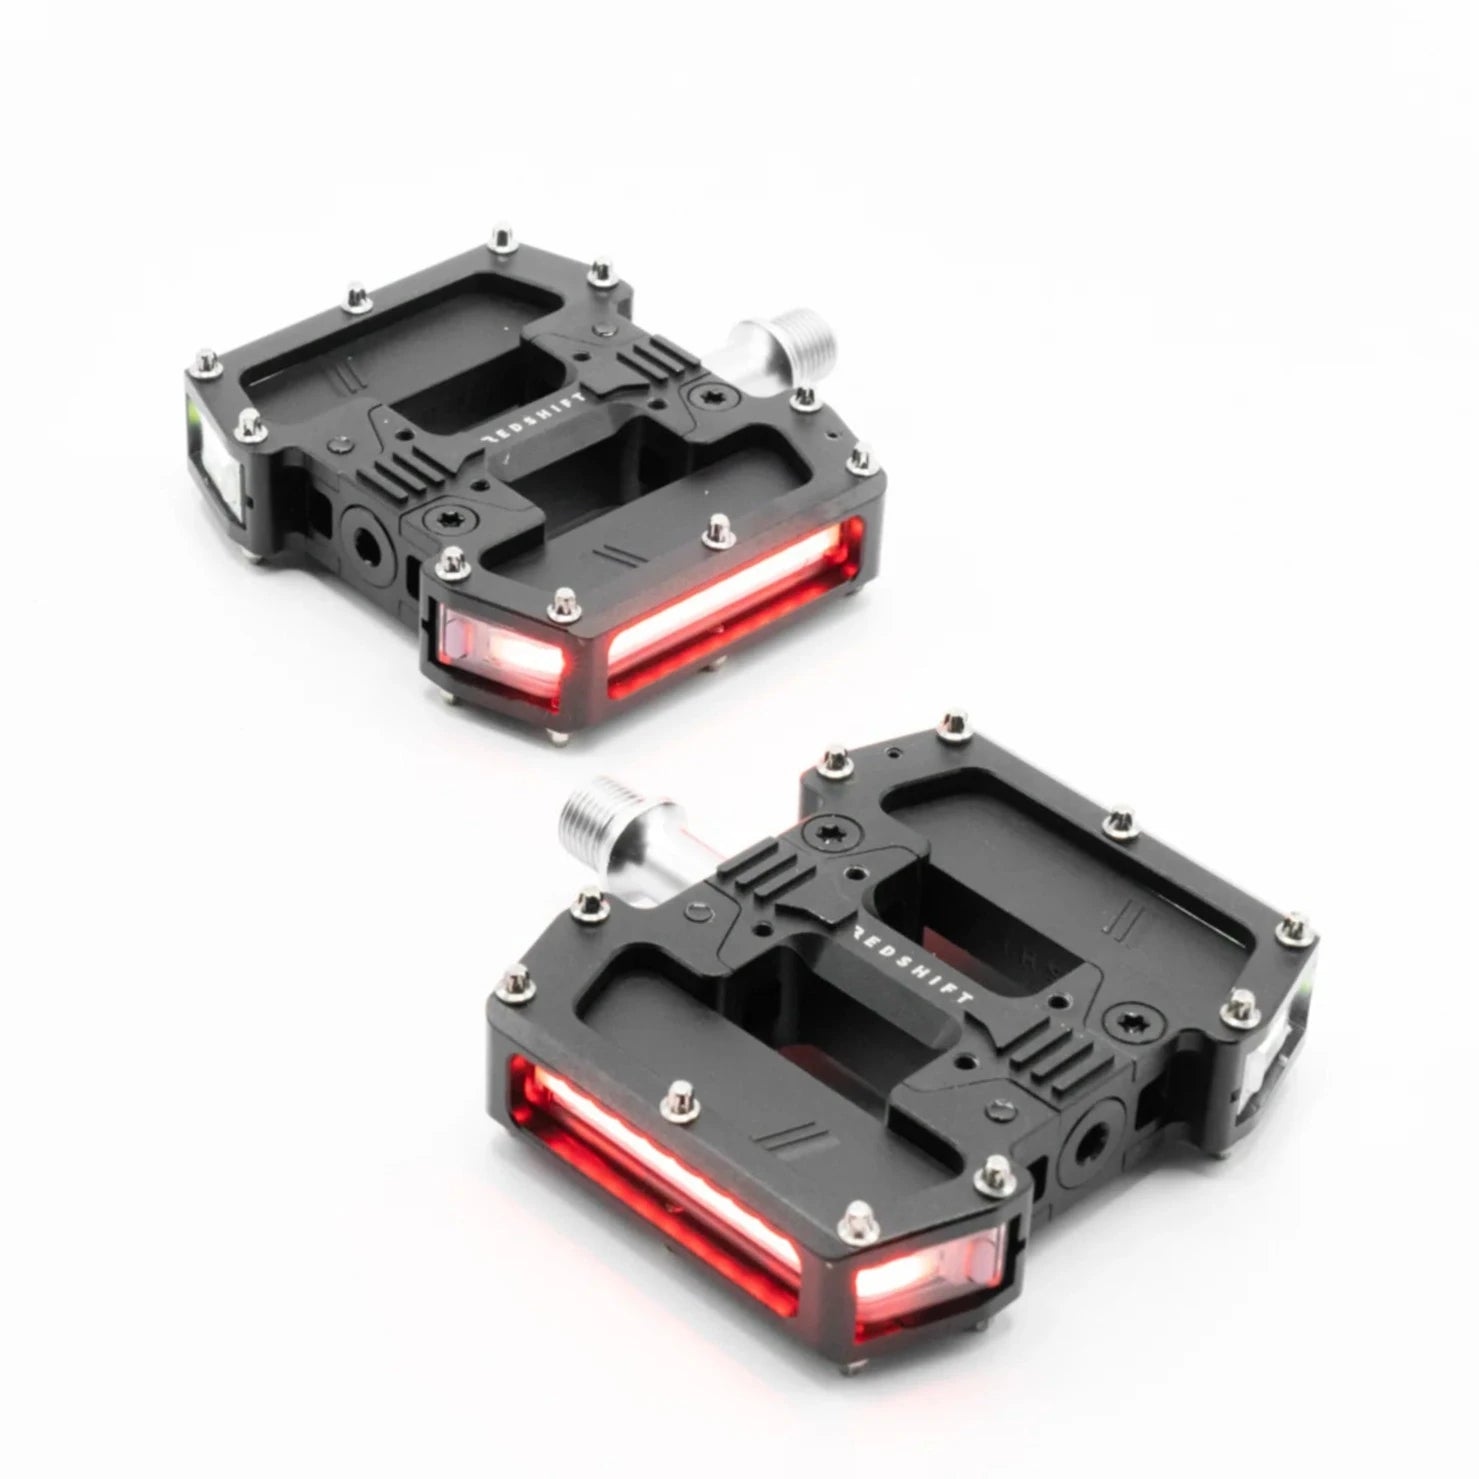 Redshift Arclight Pedal Set